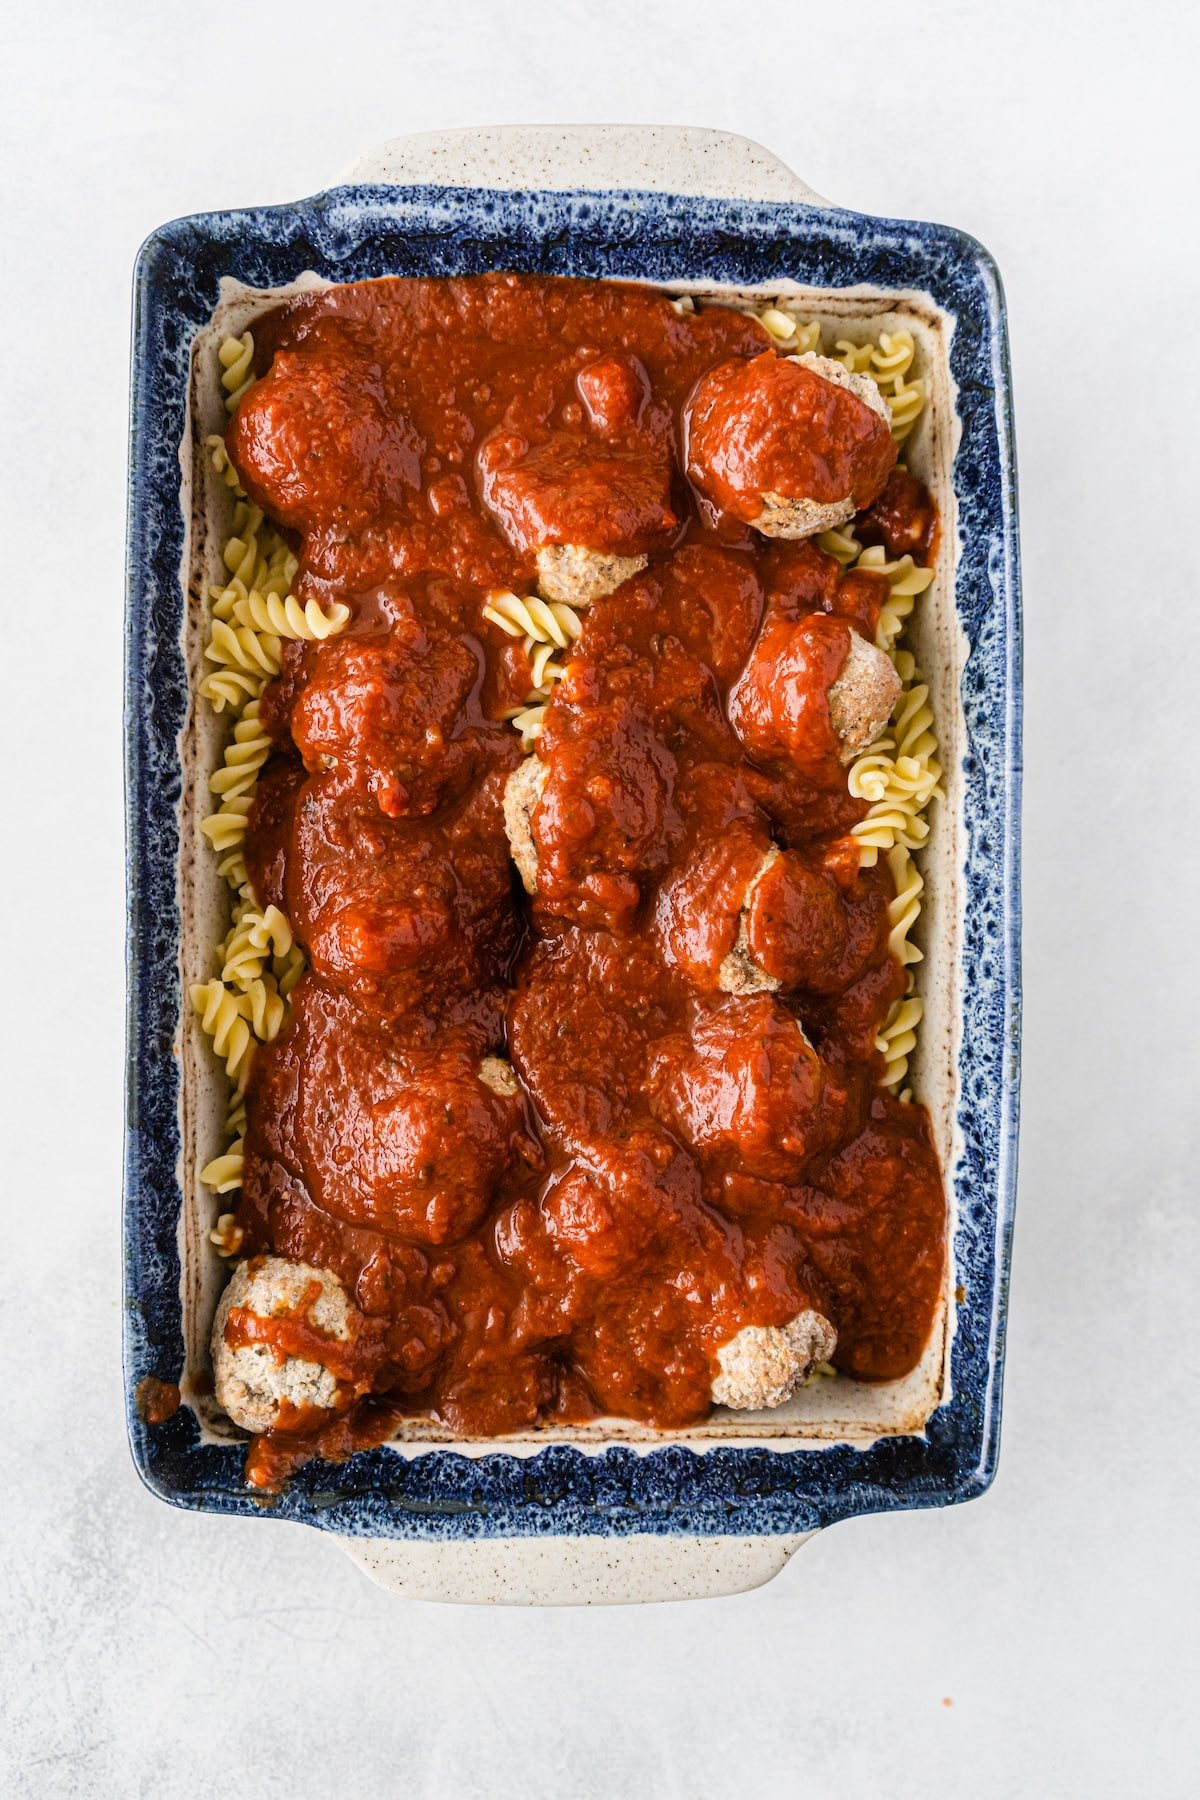 sauce over meatballs and cooked pasta in casserole dish.